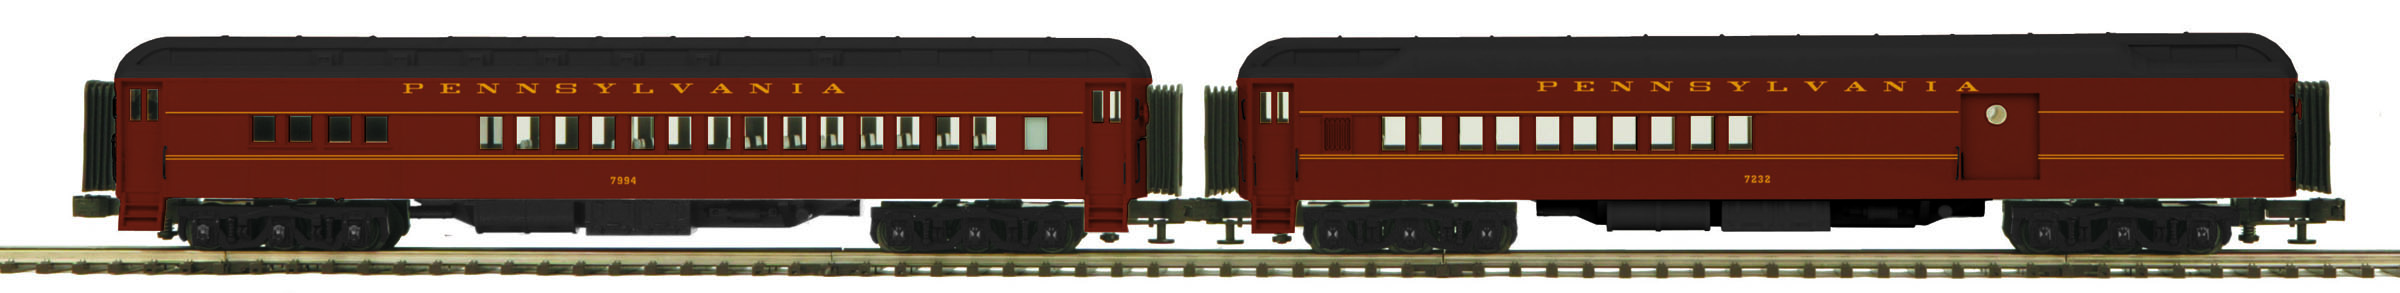 MTH Electric Trains Shipping, Through March 2015 | O Gauge Railroading 